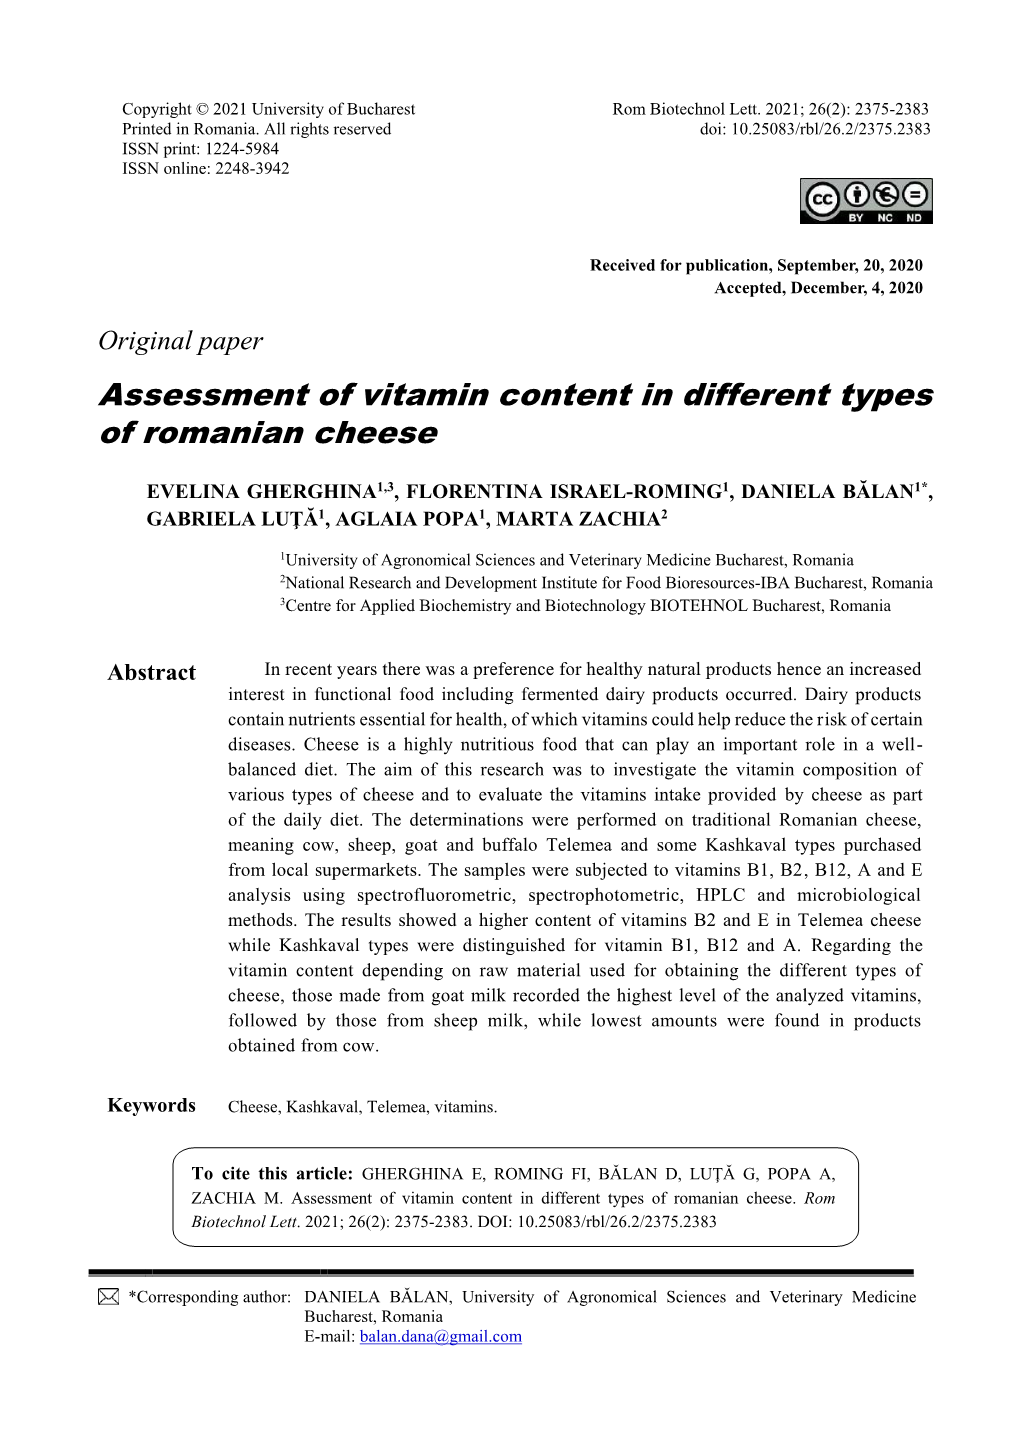 Assessment of Vitamin Content in Different Types of Romanian Cheese